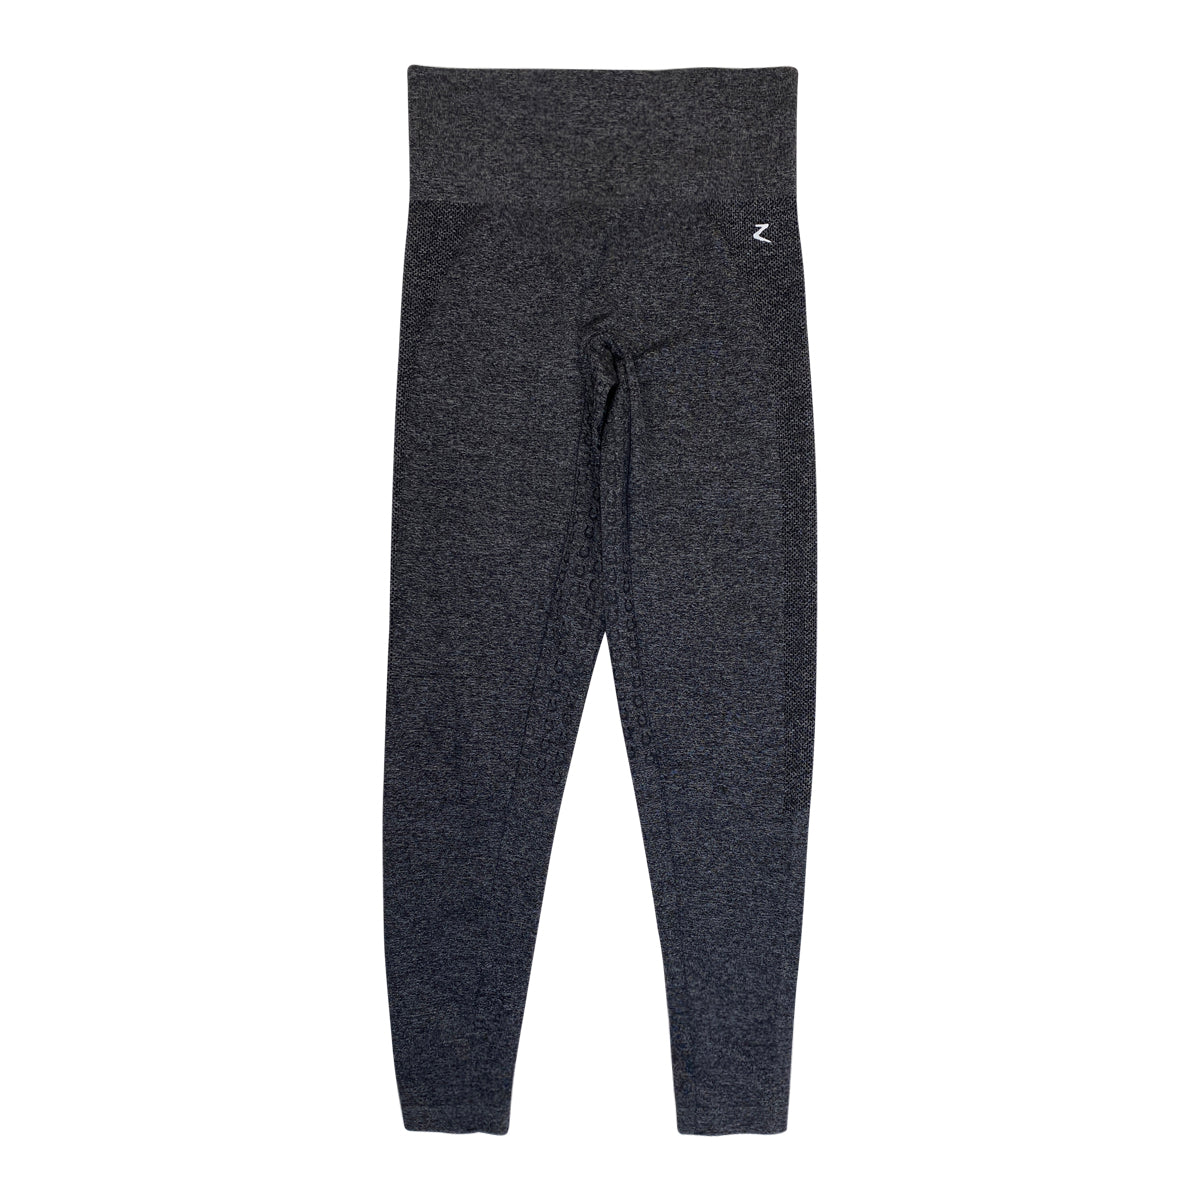 Horze Compression Full Seat Tights in Grey Heather